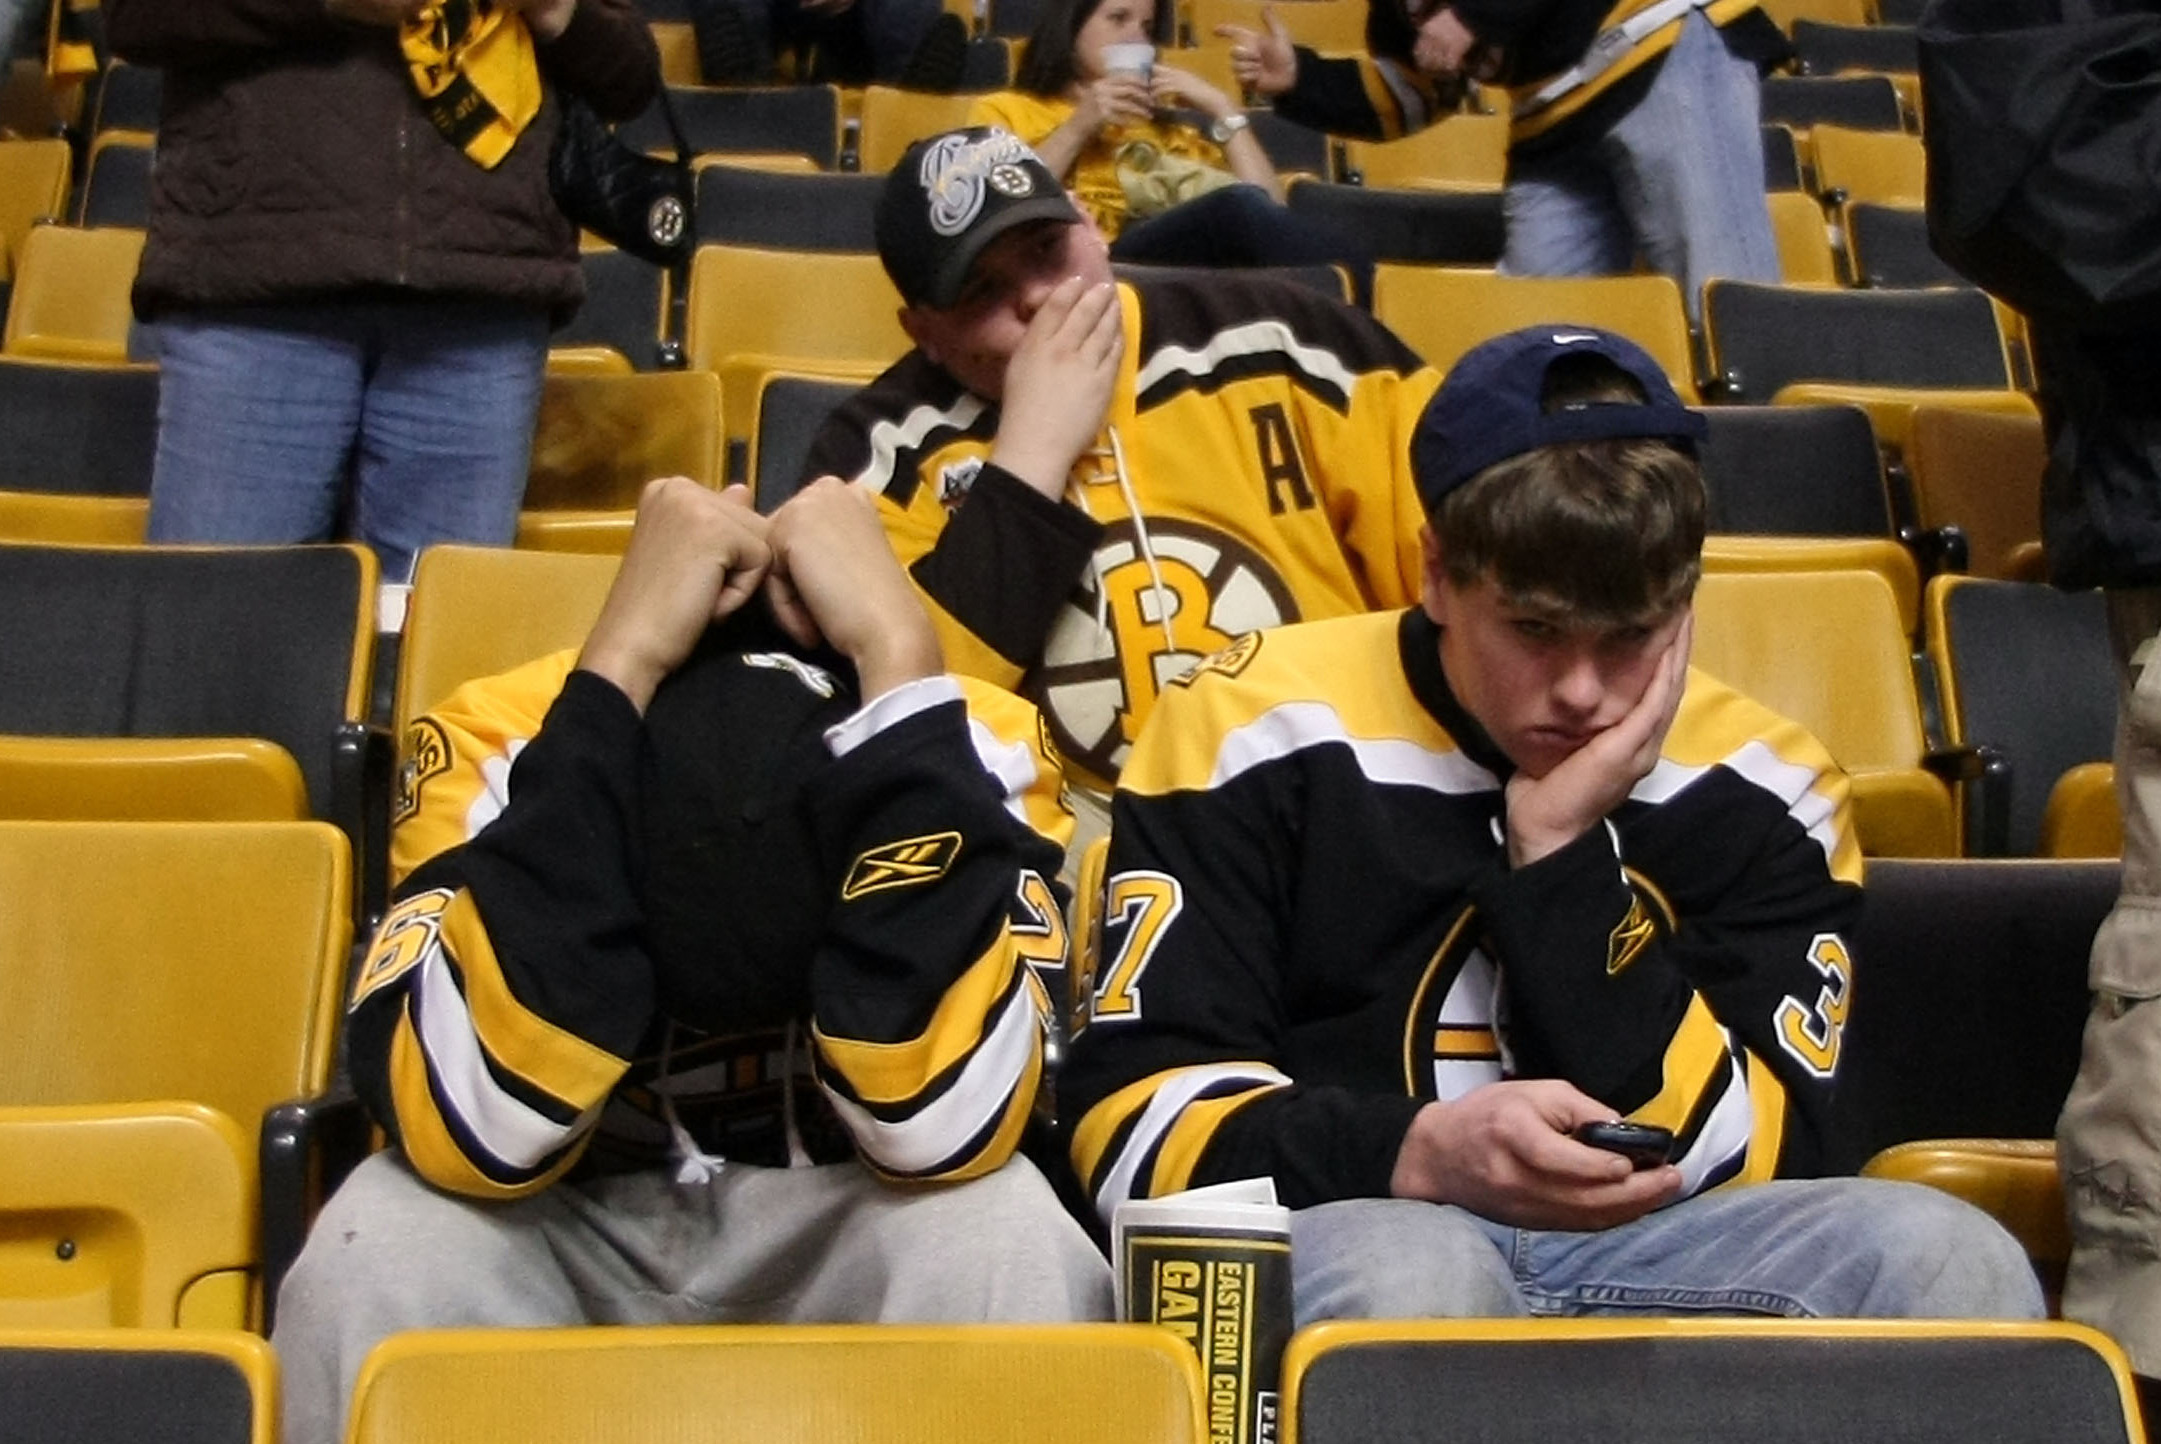 Photo: Boston Bruins fan at game 7 of the NHL Eastern Conference